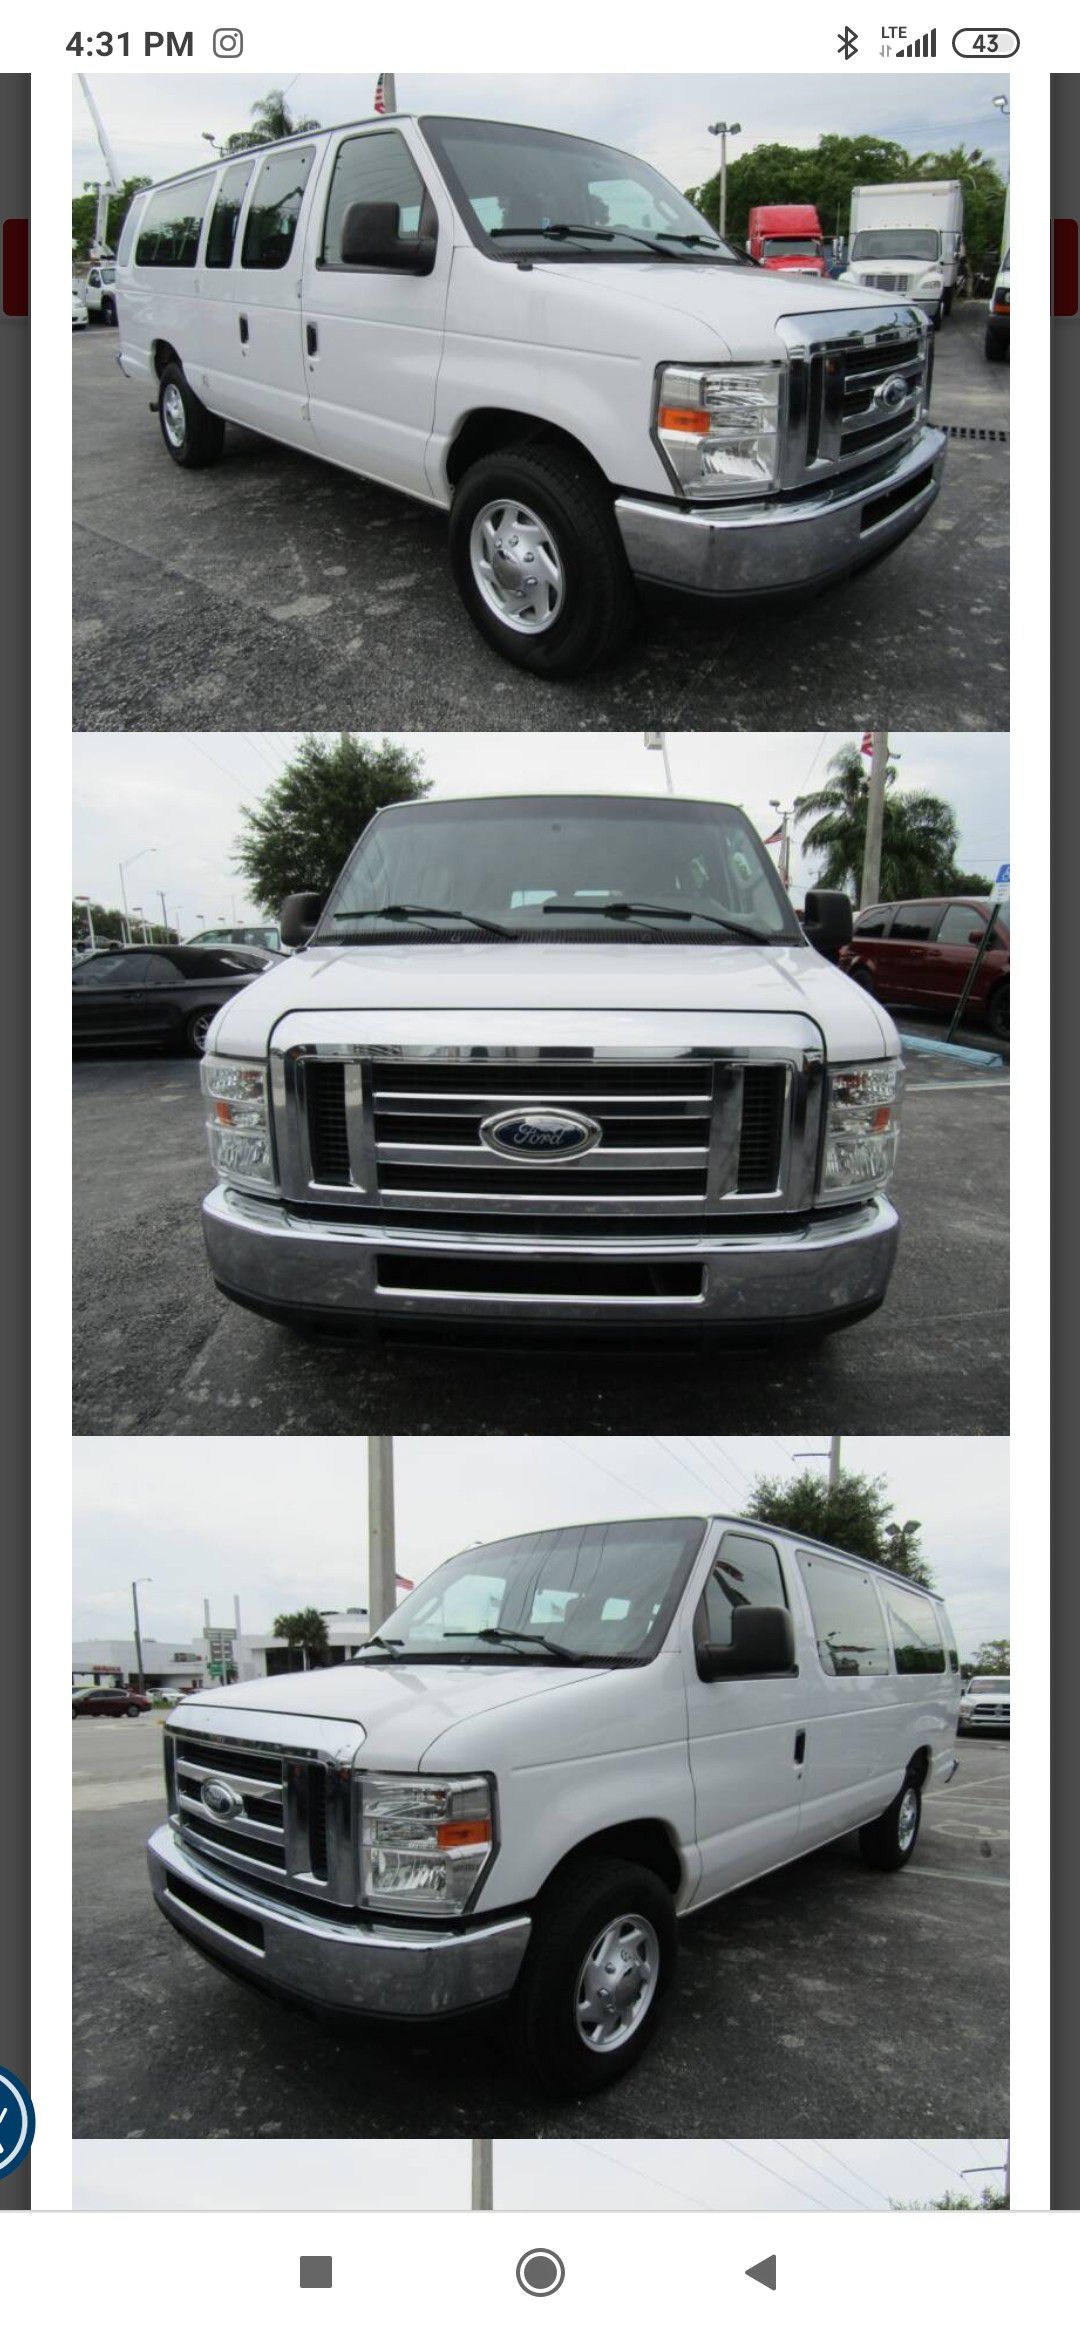 2014 FORD E350 15 PASSENGER VAN FINANCING AVAILABLE AUTO AC CLEAN UNIT READY TO WORK STRONG RUNNING NEED MORE INFO CONTACT OLIVER 305TruckGuru